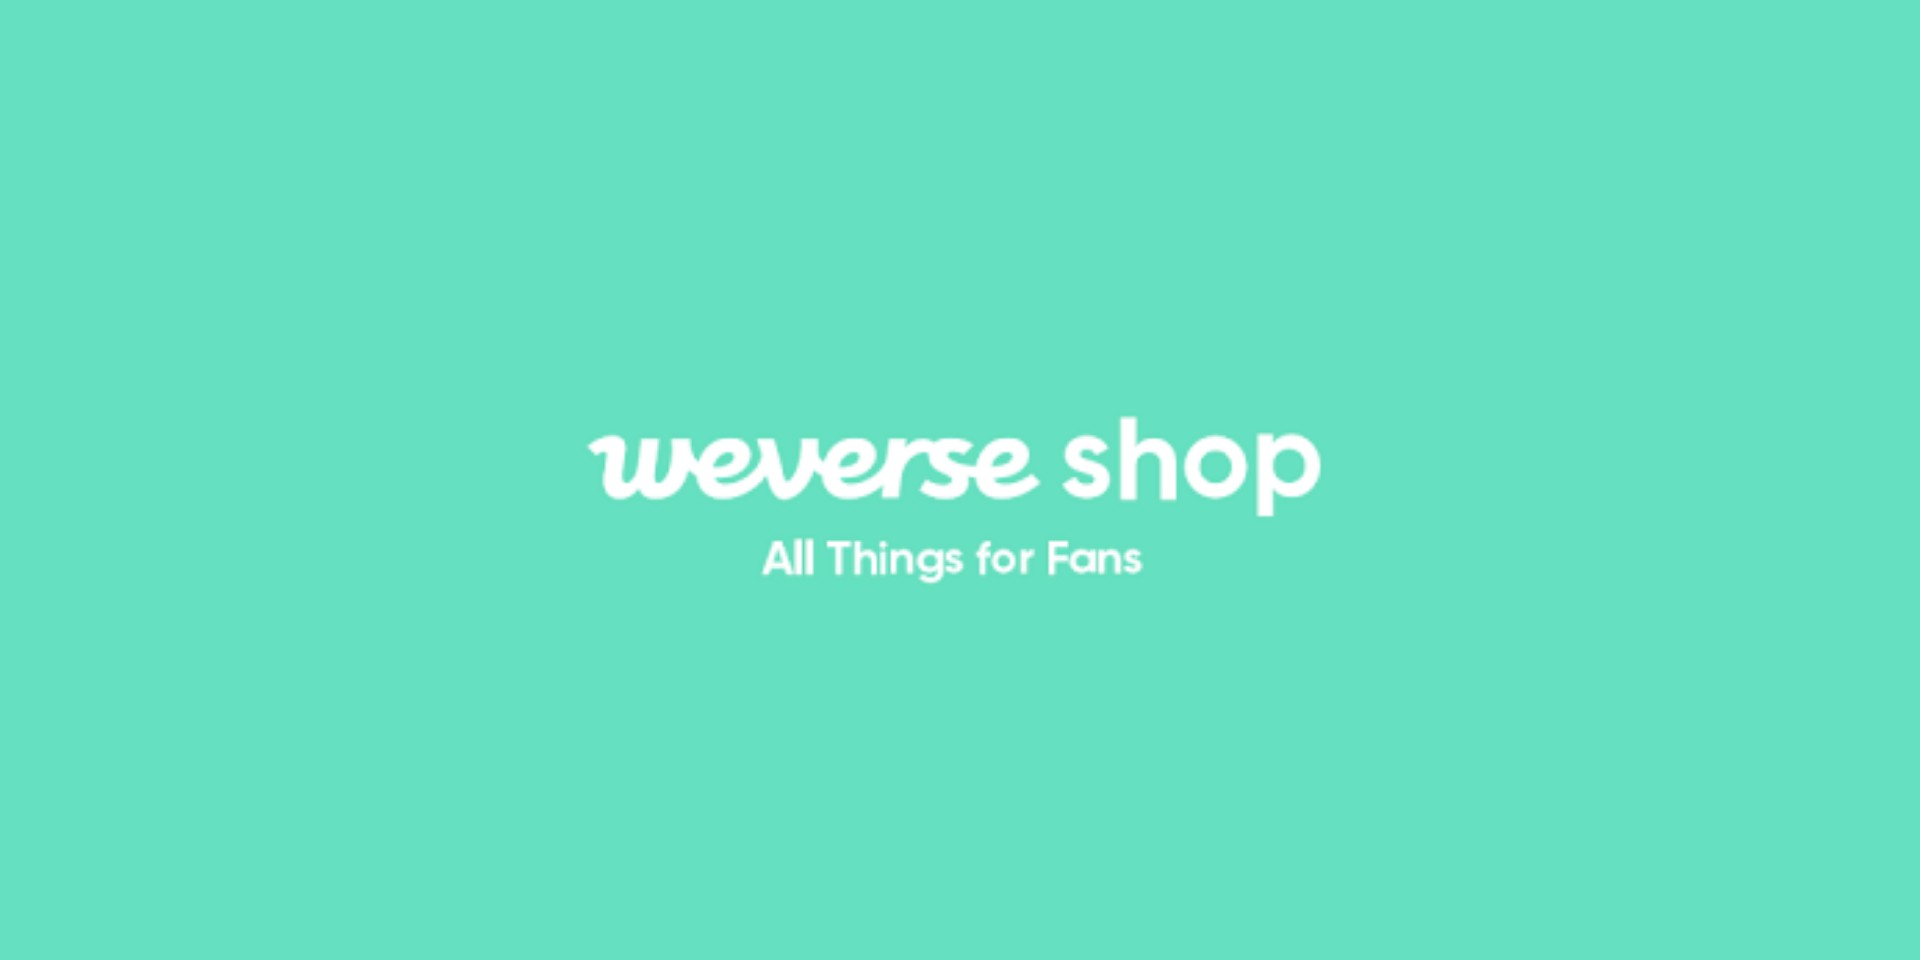 Weverse launches new shop updates, to now accept AliPay, GCash, DANA, and more